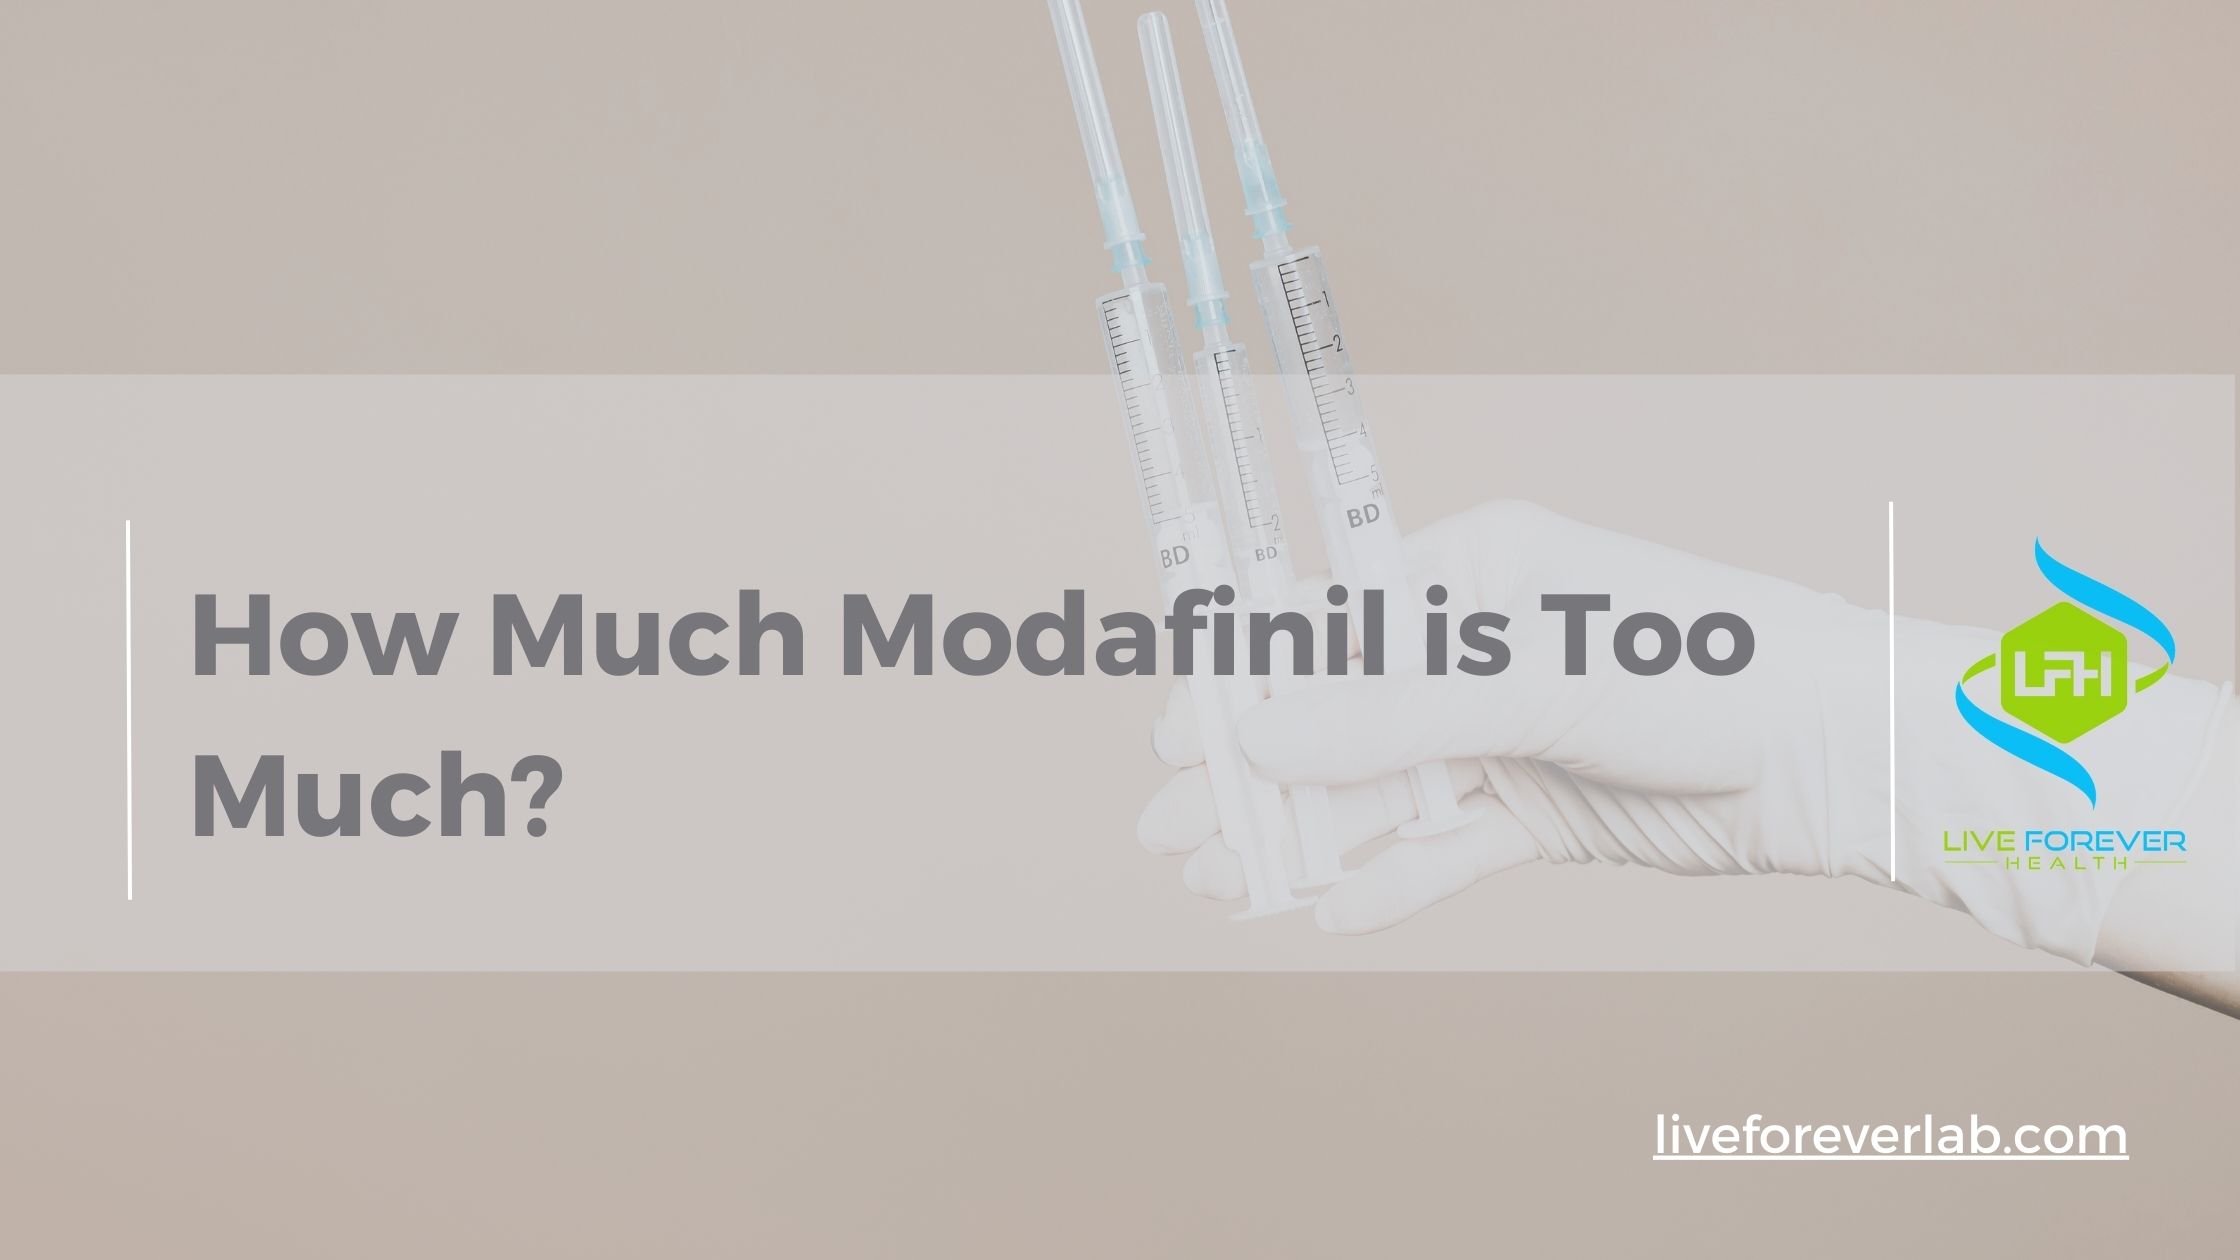 How Much Modafinil is Too Much